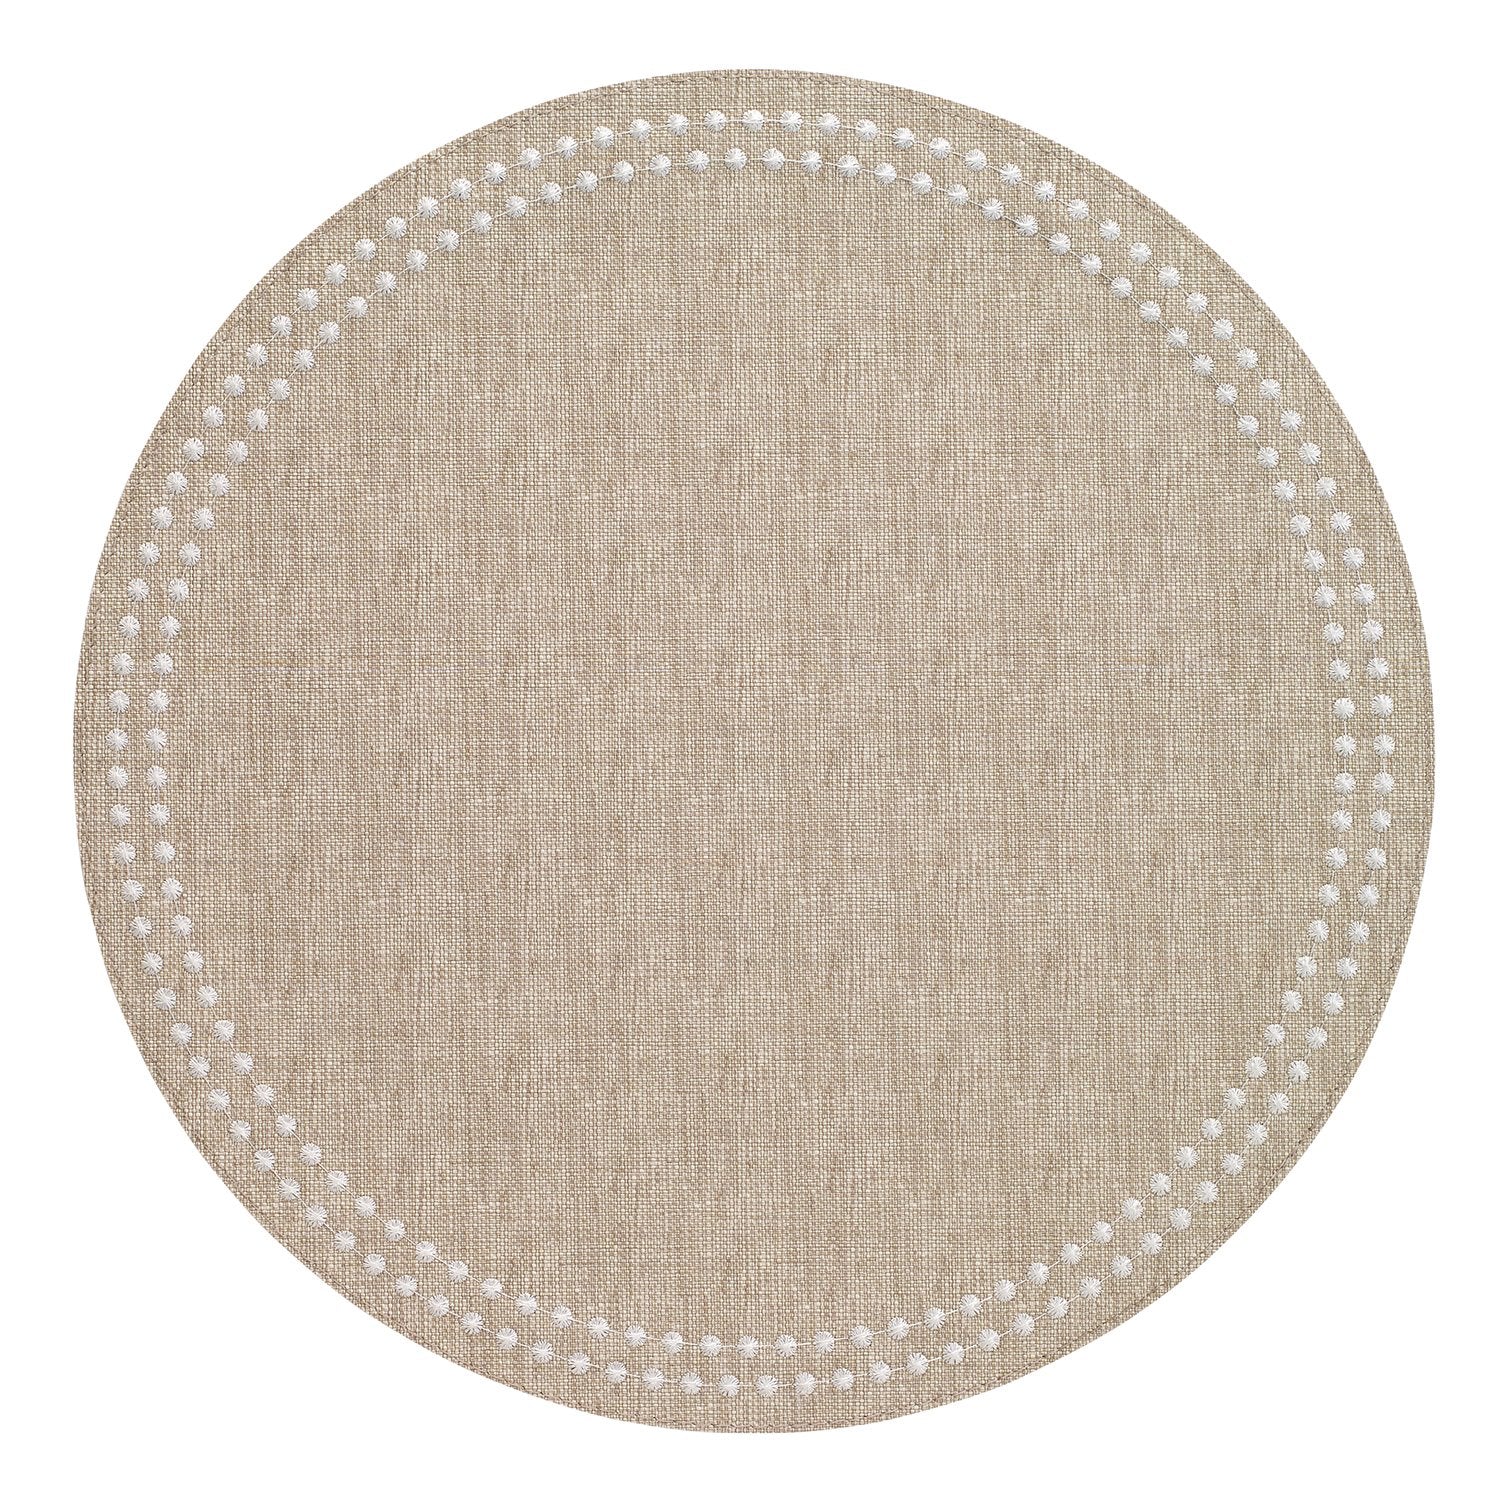 Pearls Placemat Set of 4 - Two Colors